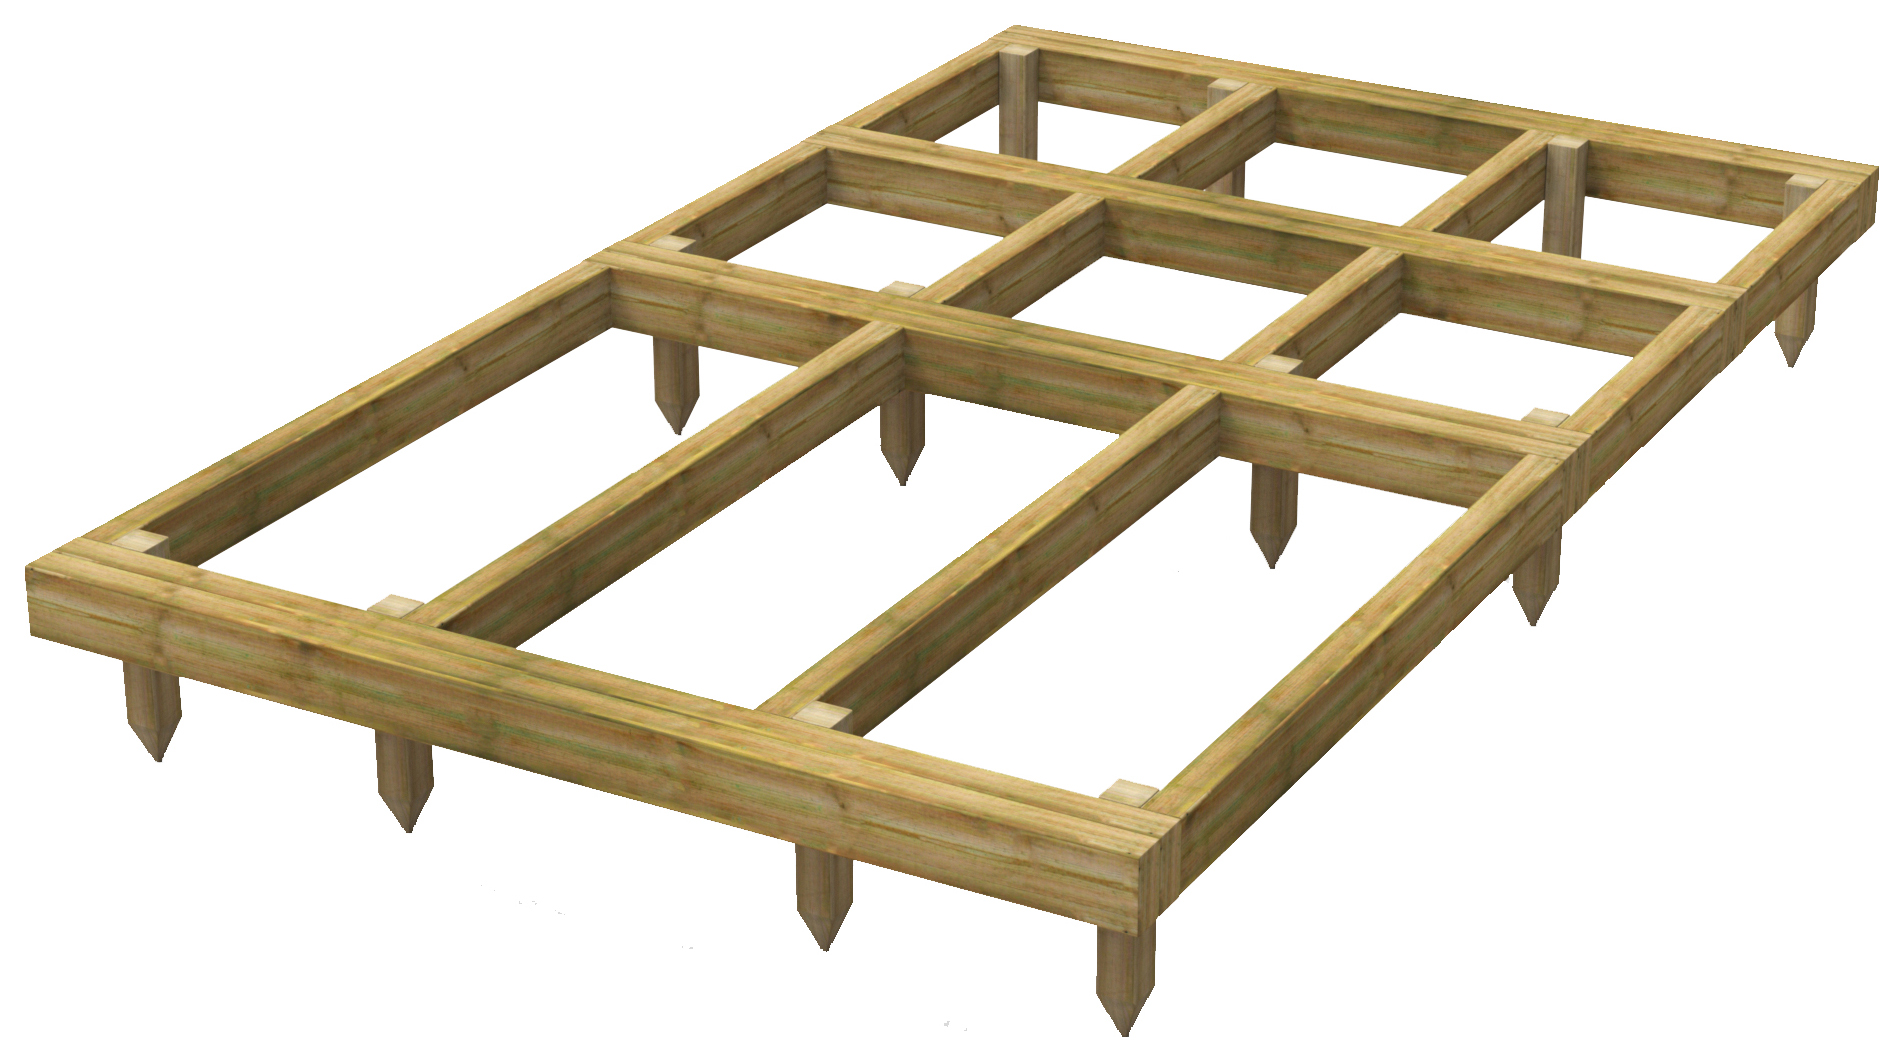 Image of Power Sheds 8 x 5ft Pressure Treated Garden Building Base Kit